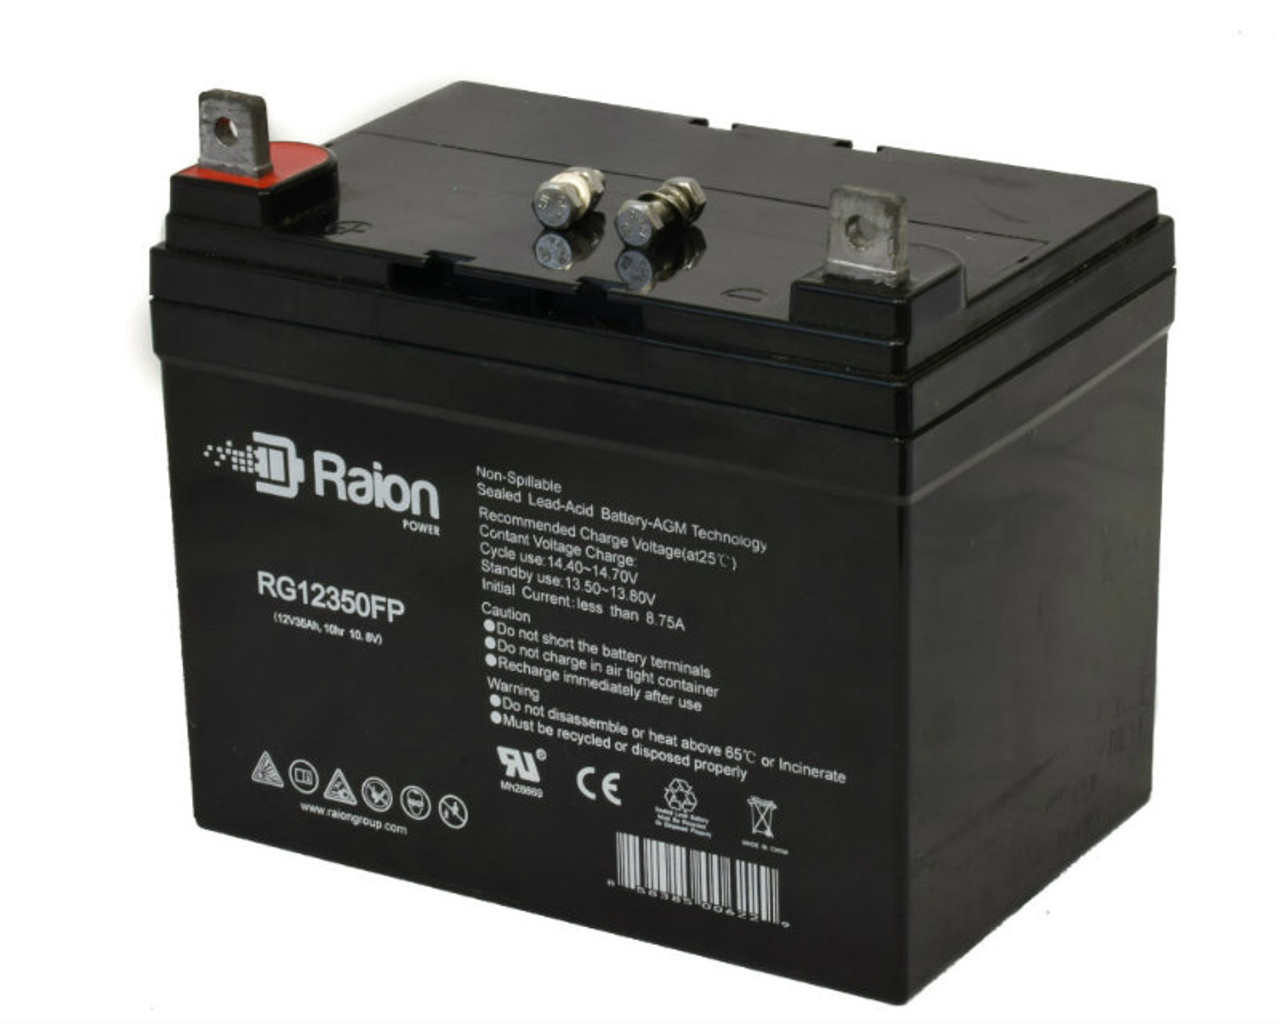 Raion Power Replacement 12V 35Ah RG12350FP Battery for ROBITON VRLA12-35